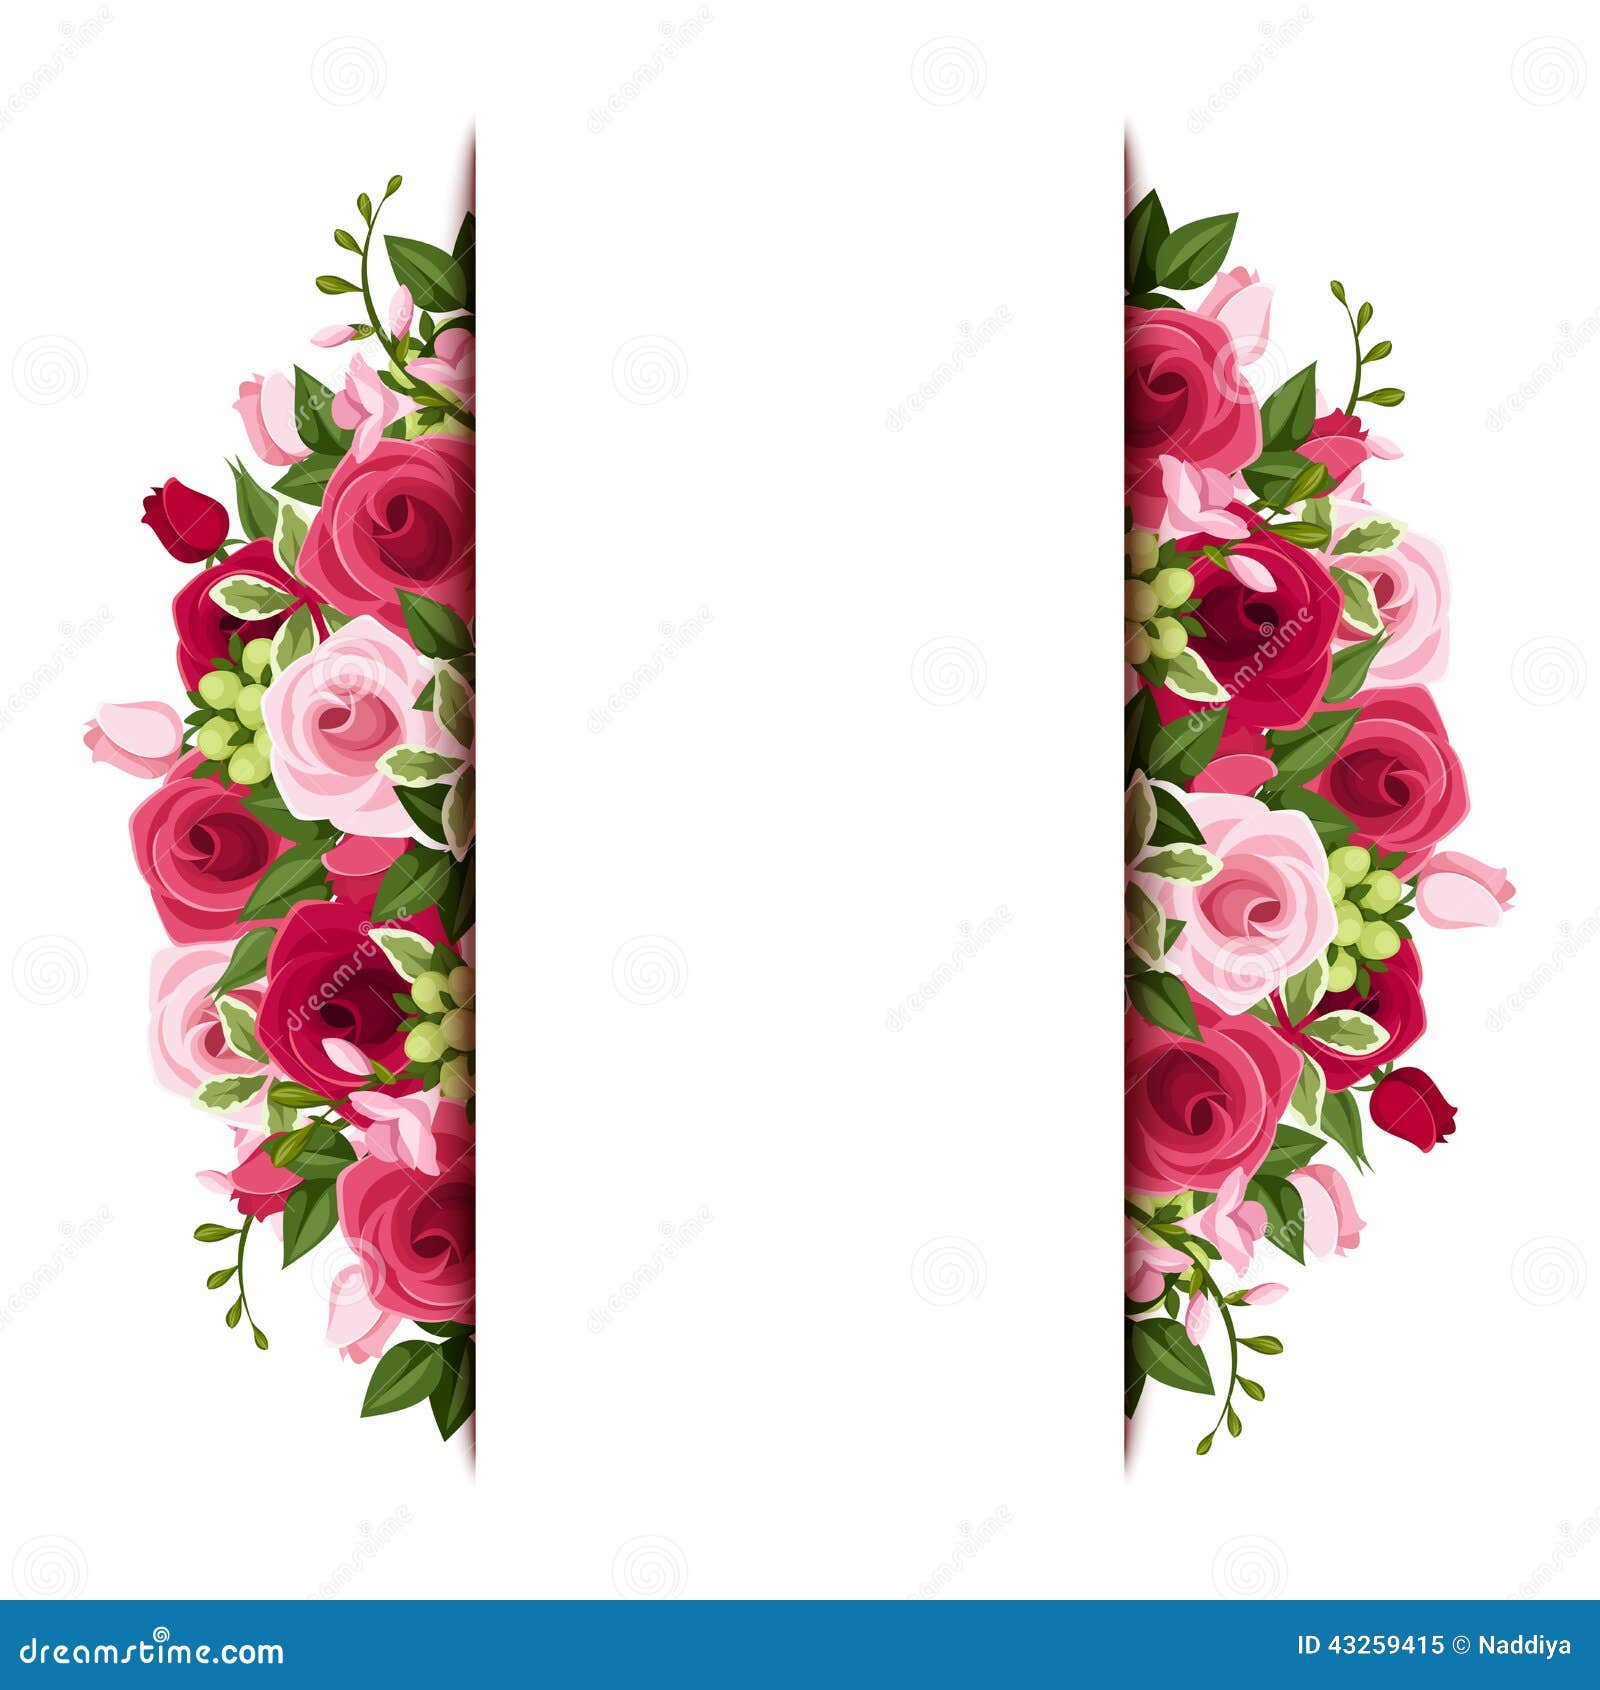 background with red and pink roses and freesia flo